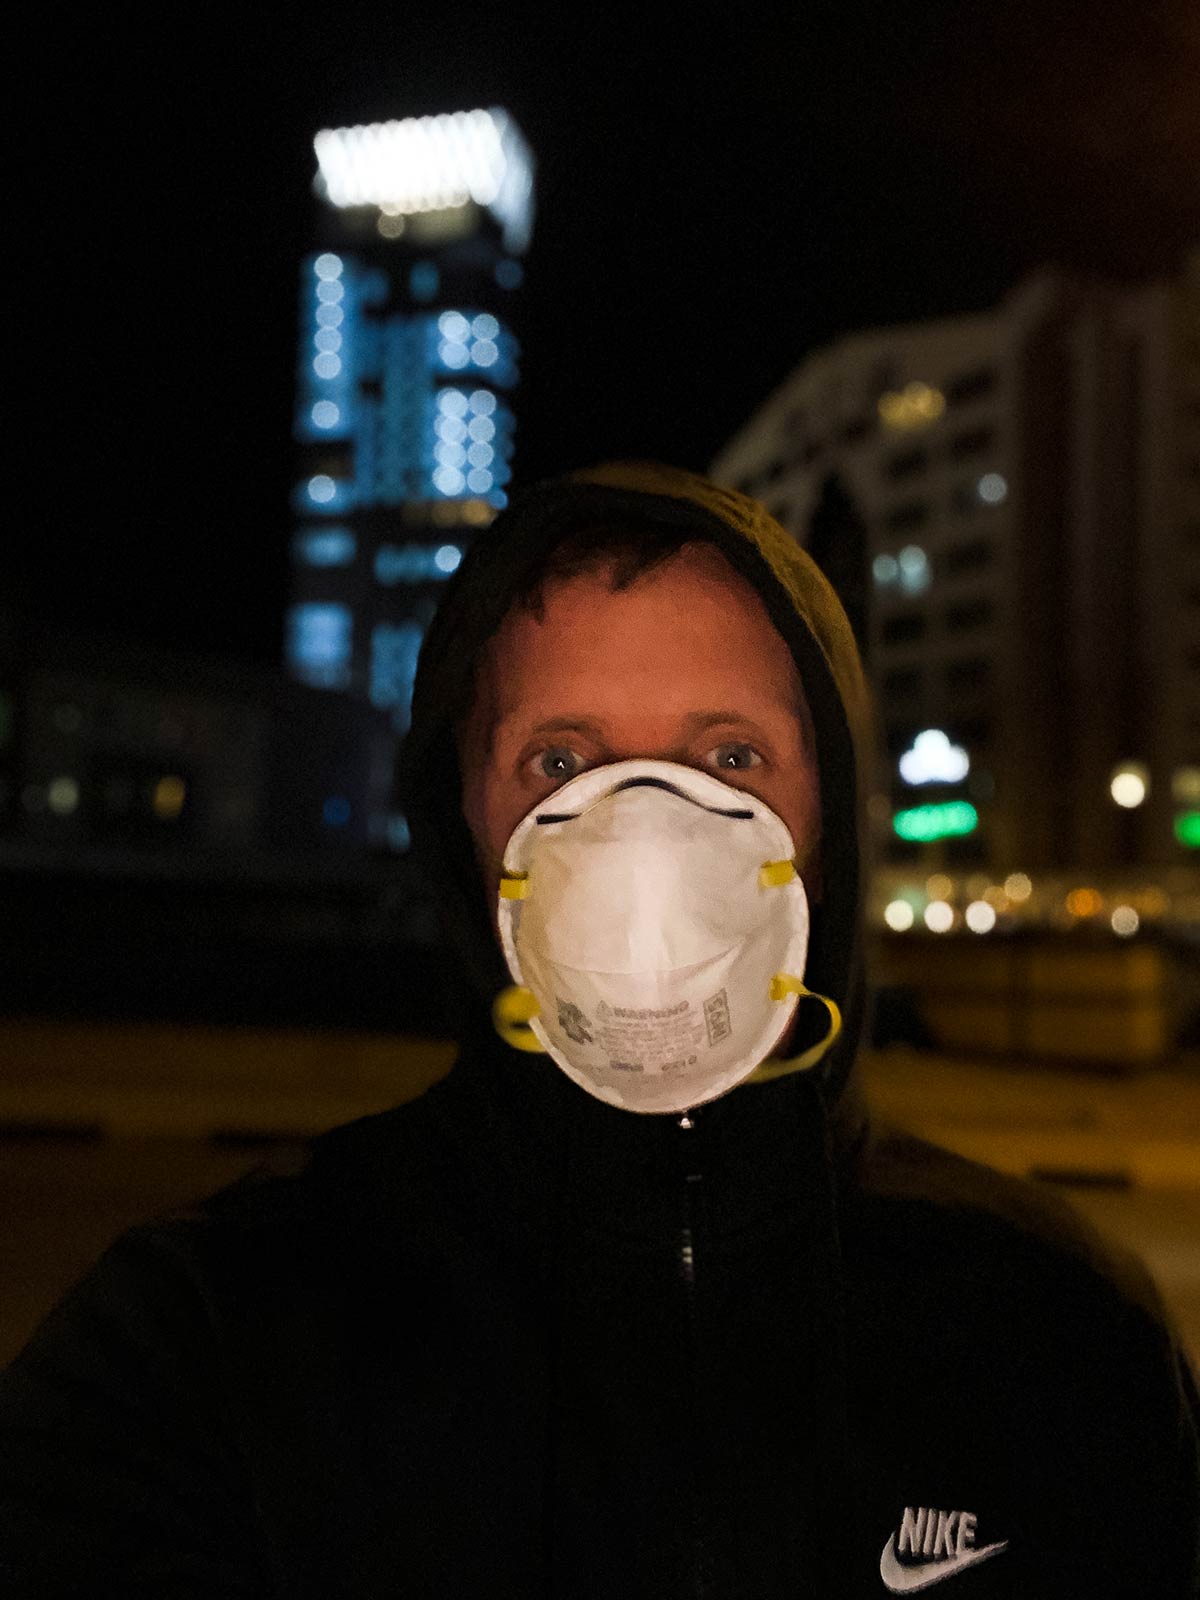 David Simpson wearing mask at night in Kuwait. 2020 - A silver lining